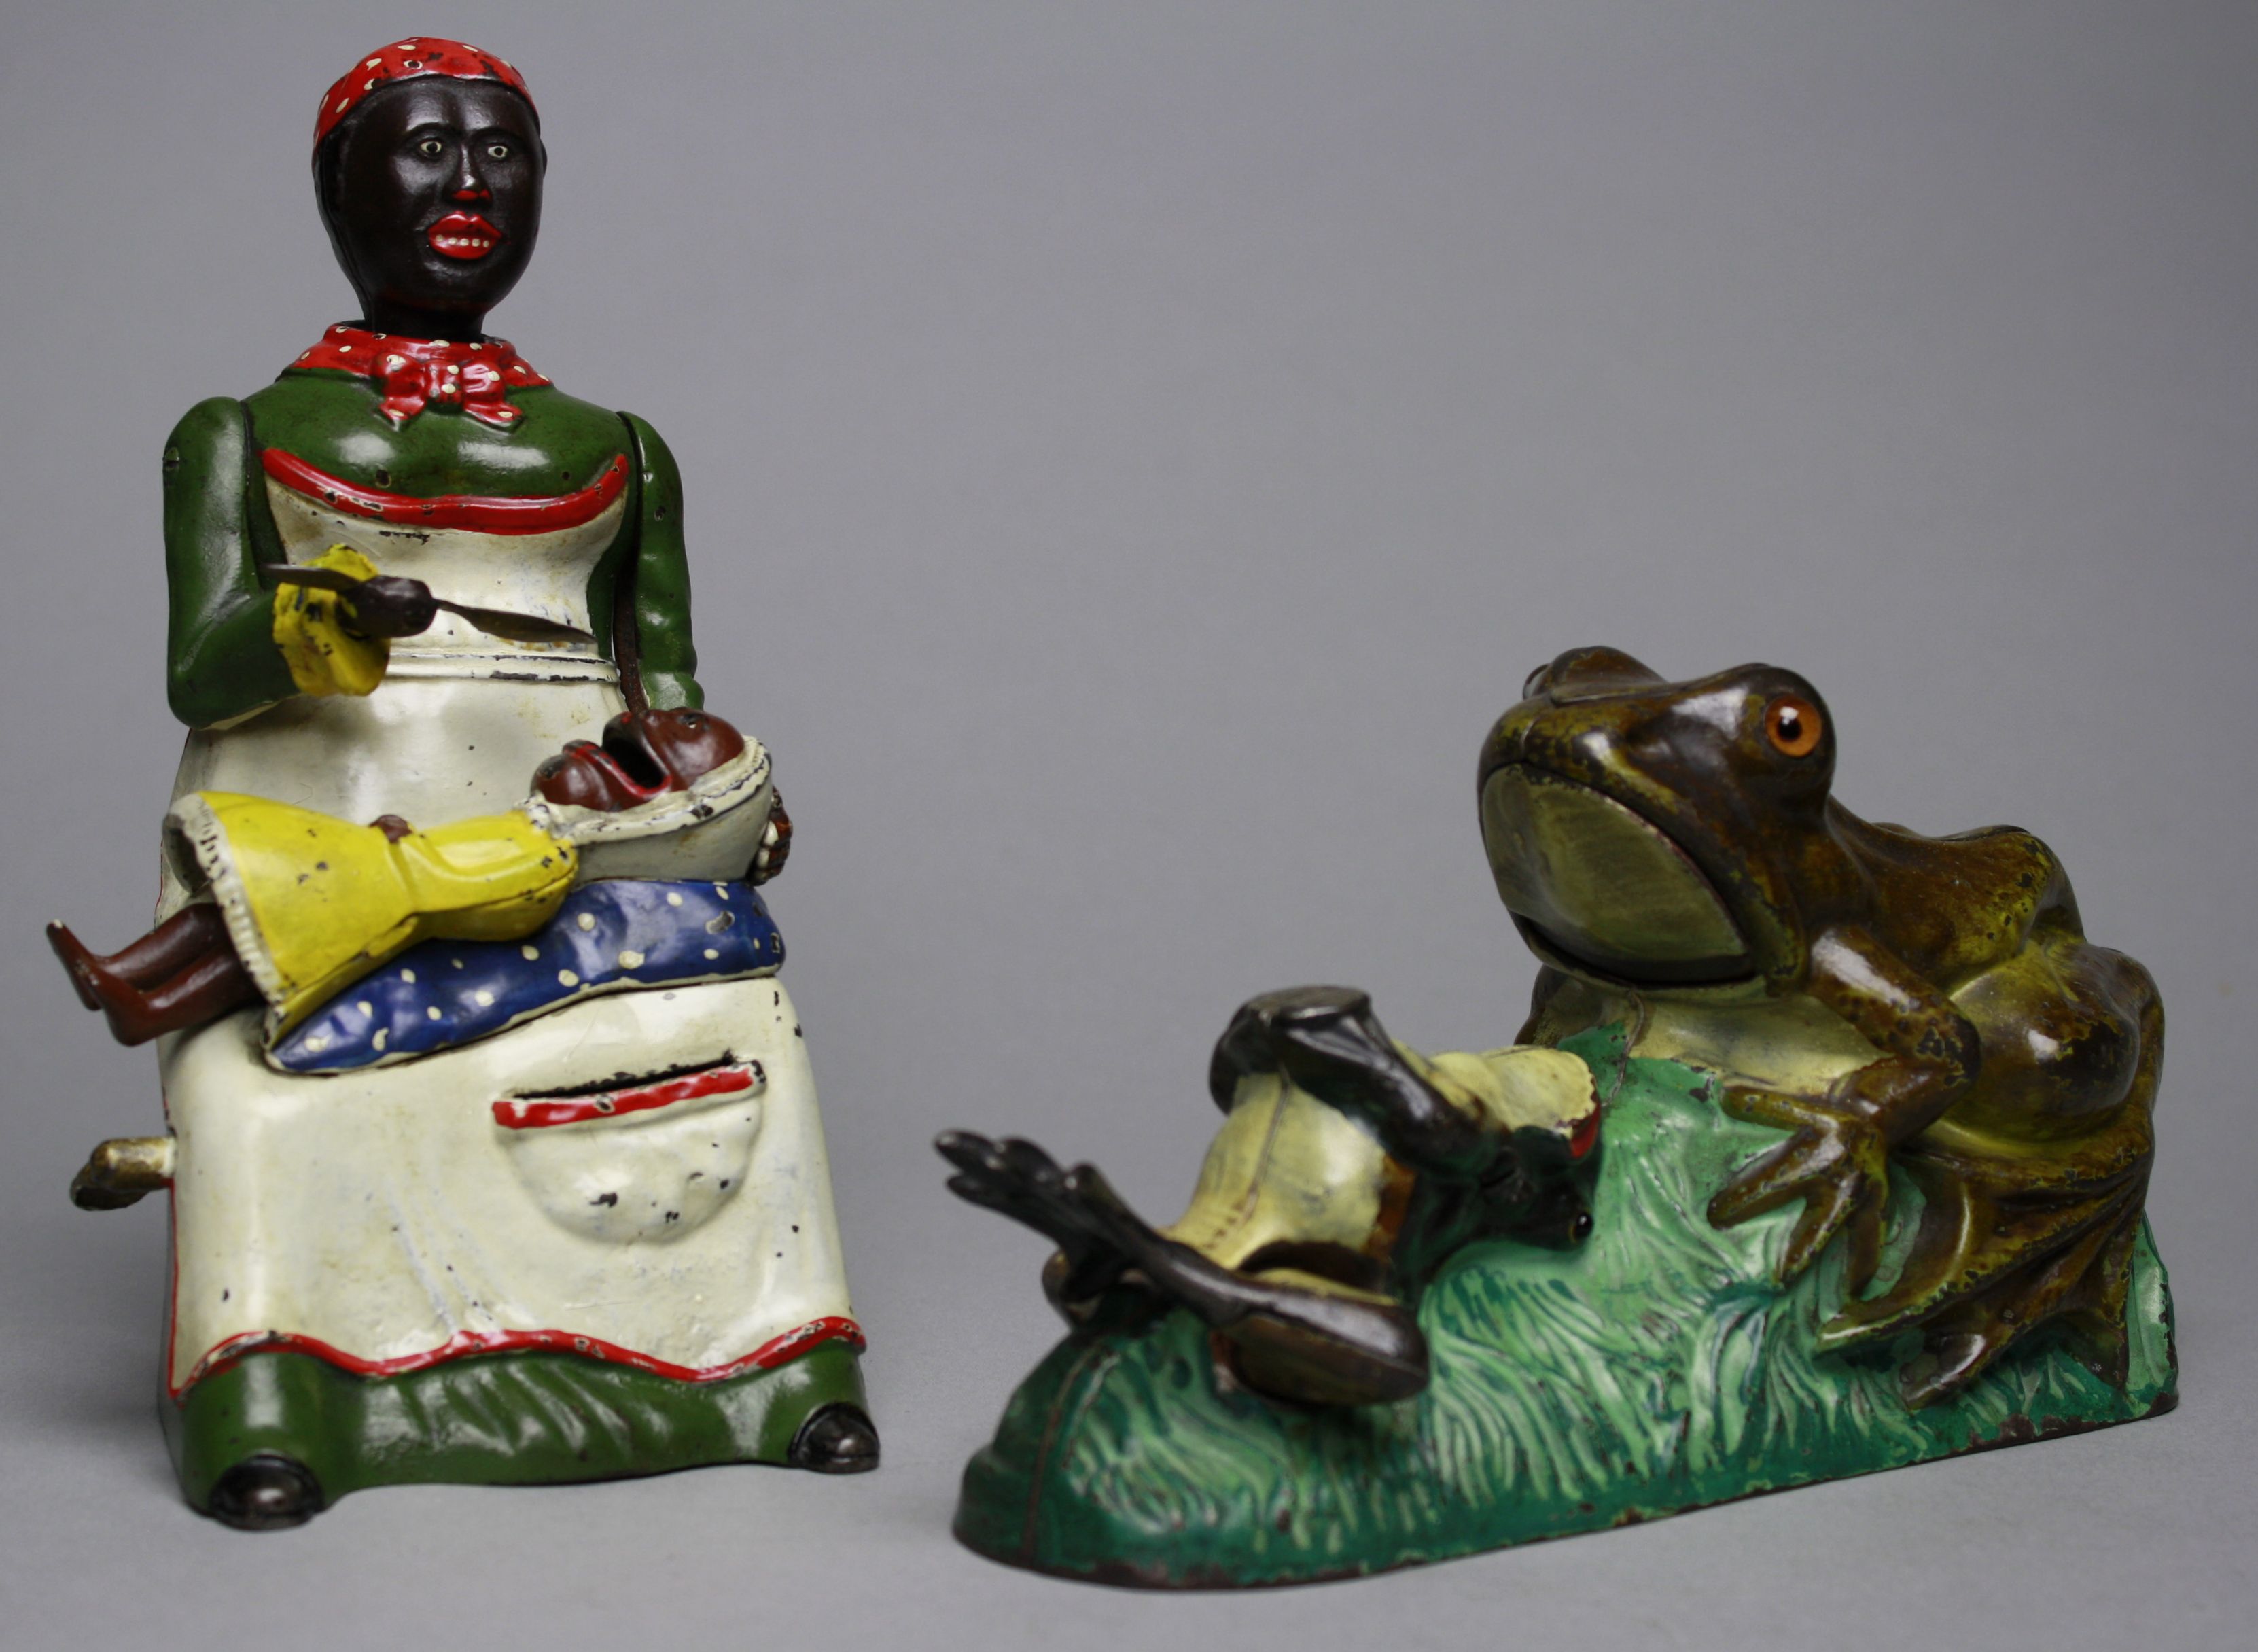 Finest known example of a green-dress Mammy mechanical bank plus an exceptional Two Frogs mechanical bank. RSL Auction image